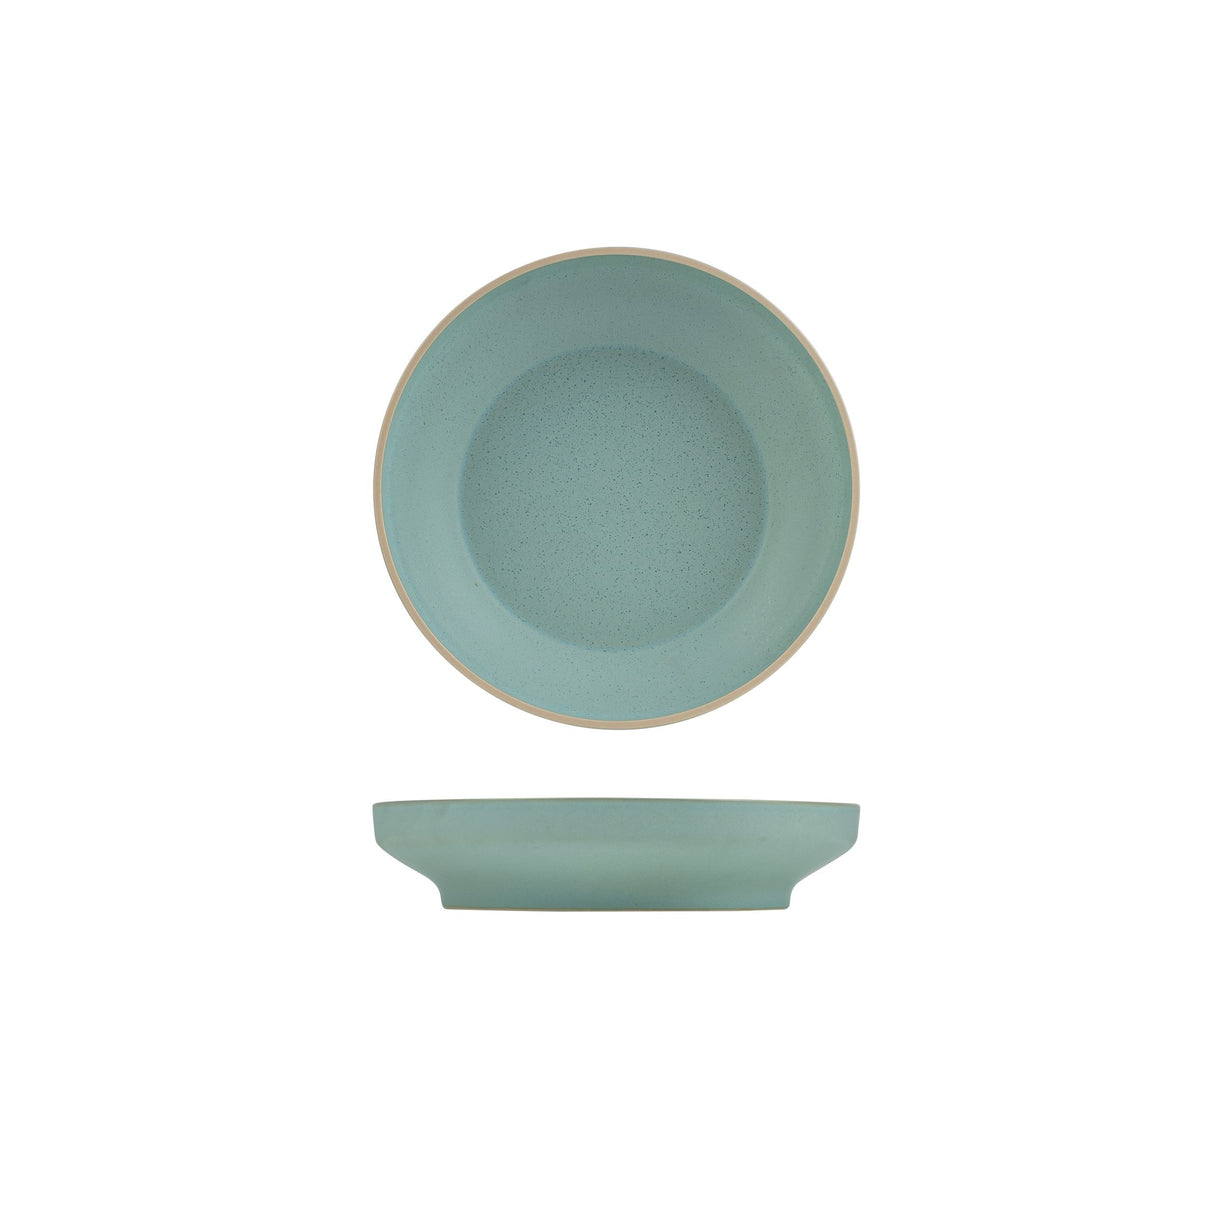 Share Bowl - 228Mm, frosted blue: Pack of 4